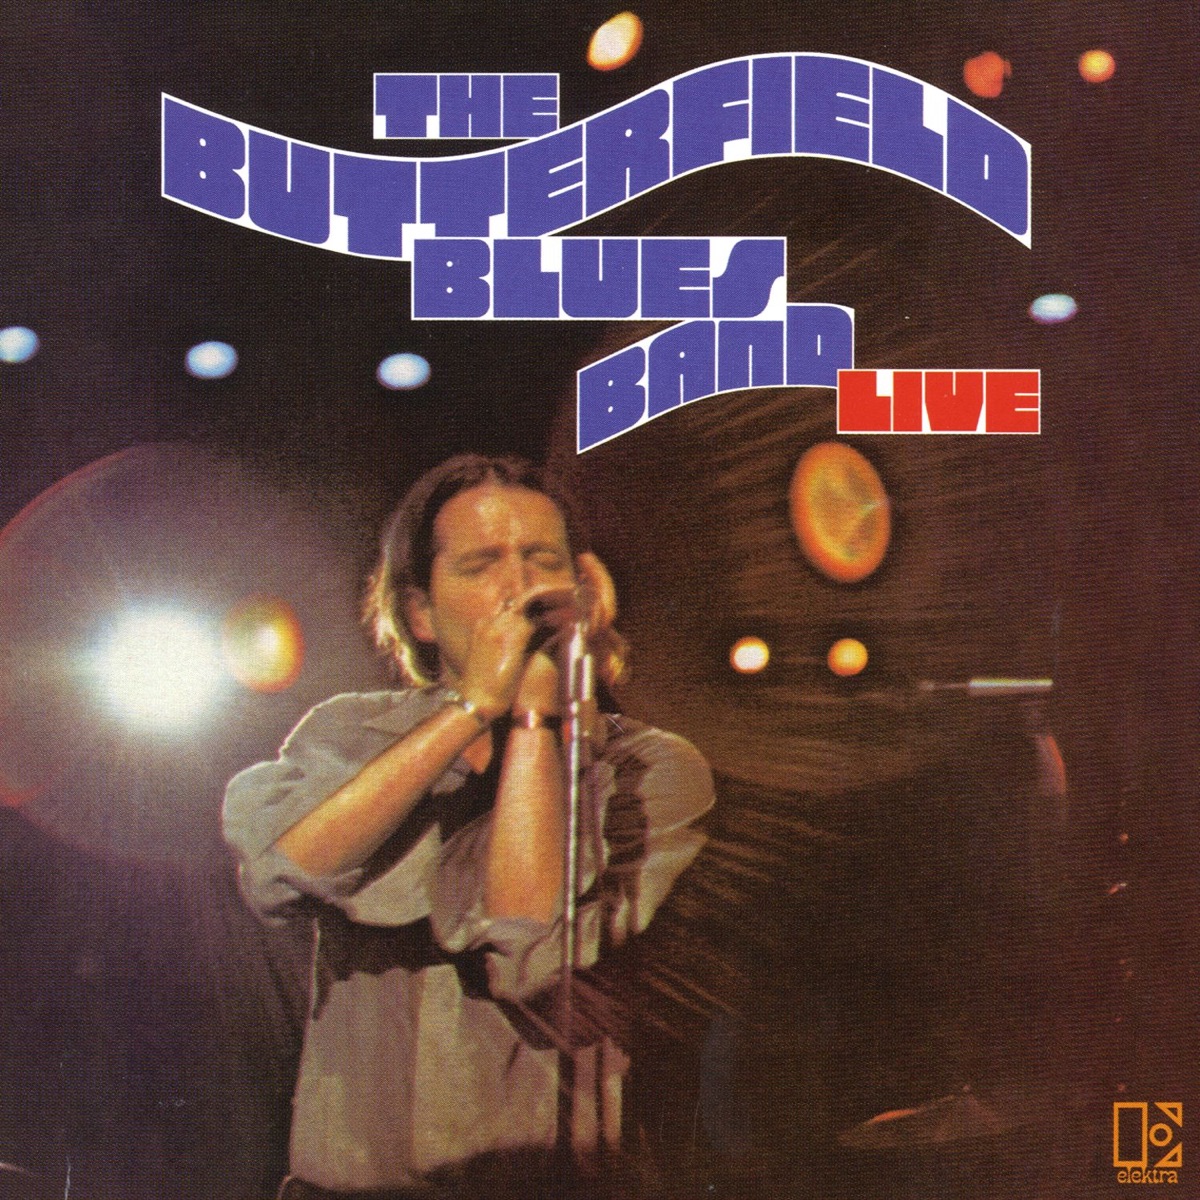 The Butterfield Blues Band Live - Album by The Paul Butterfield 